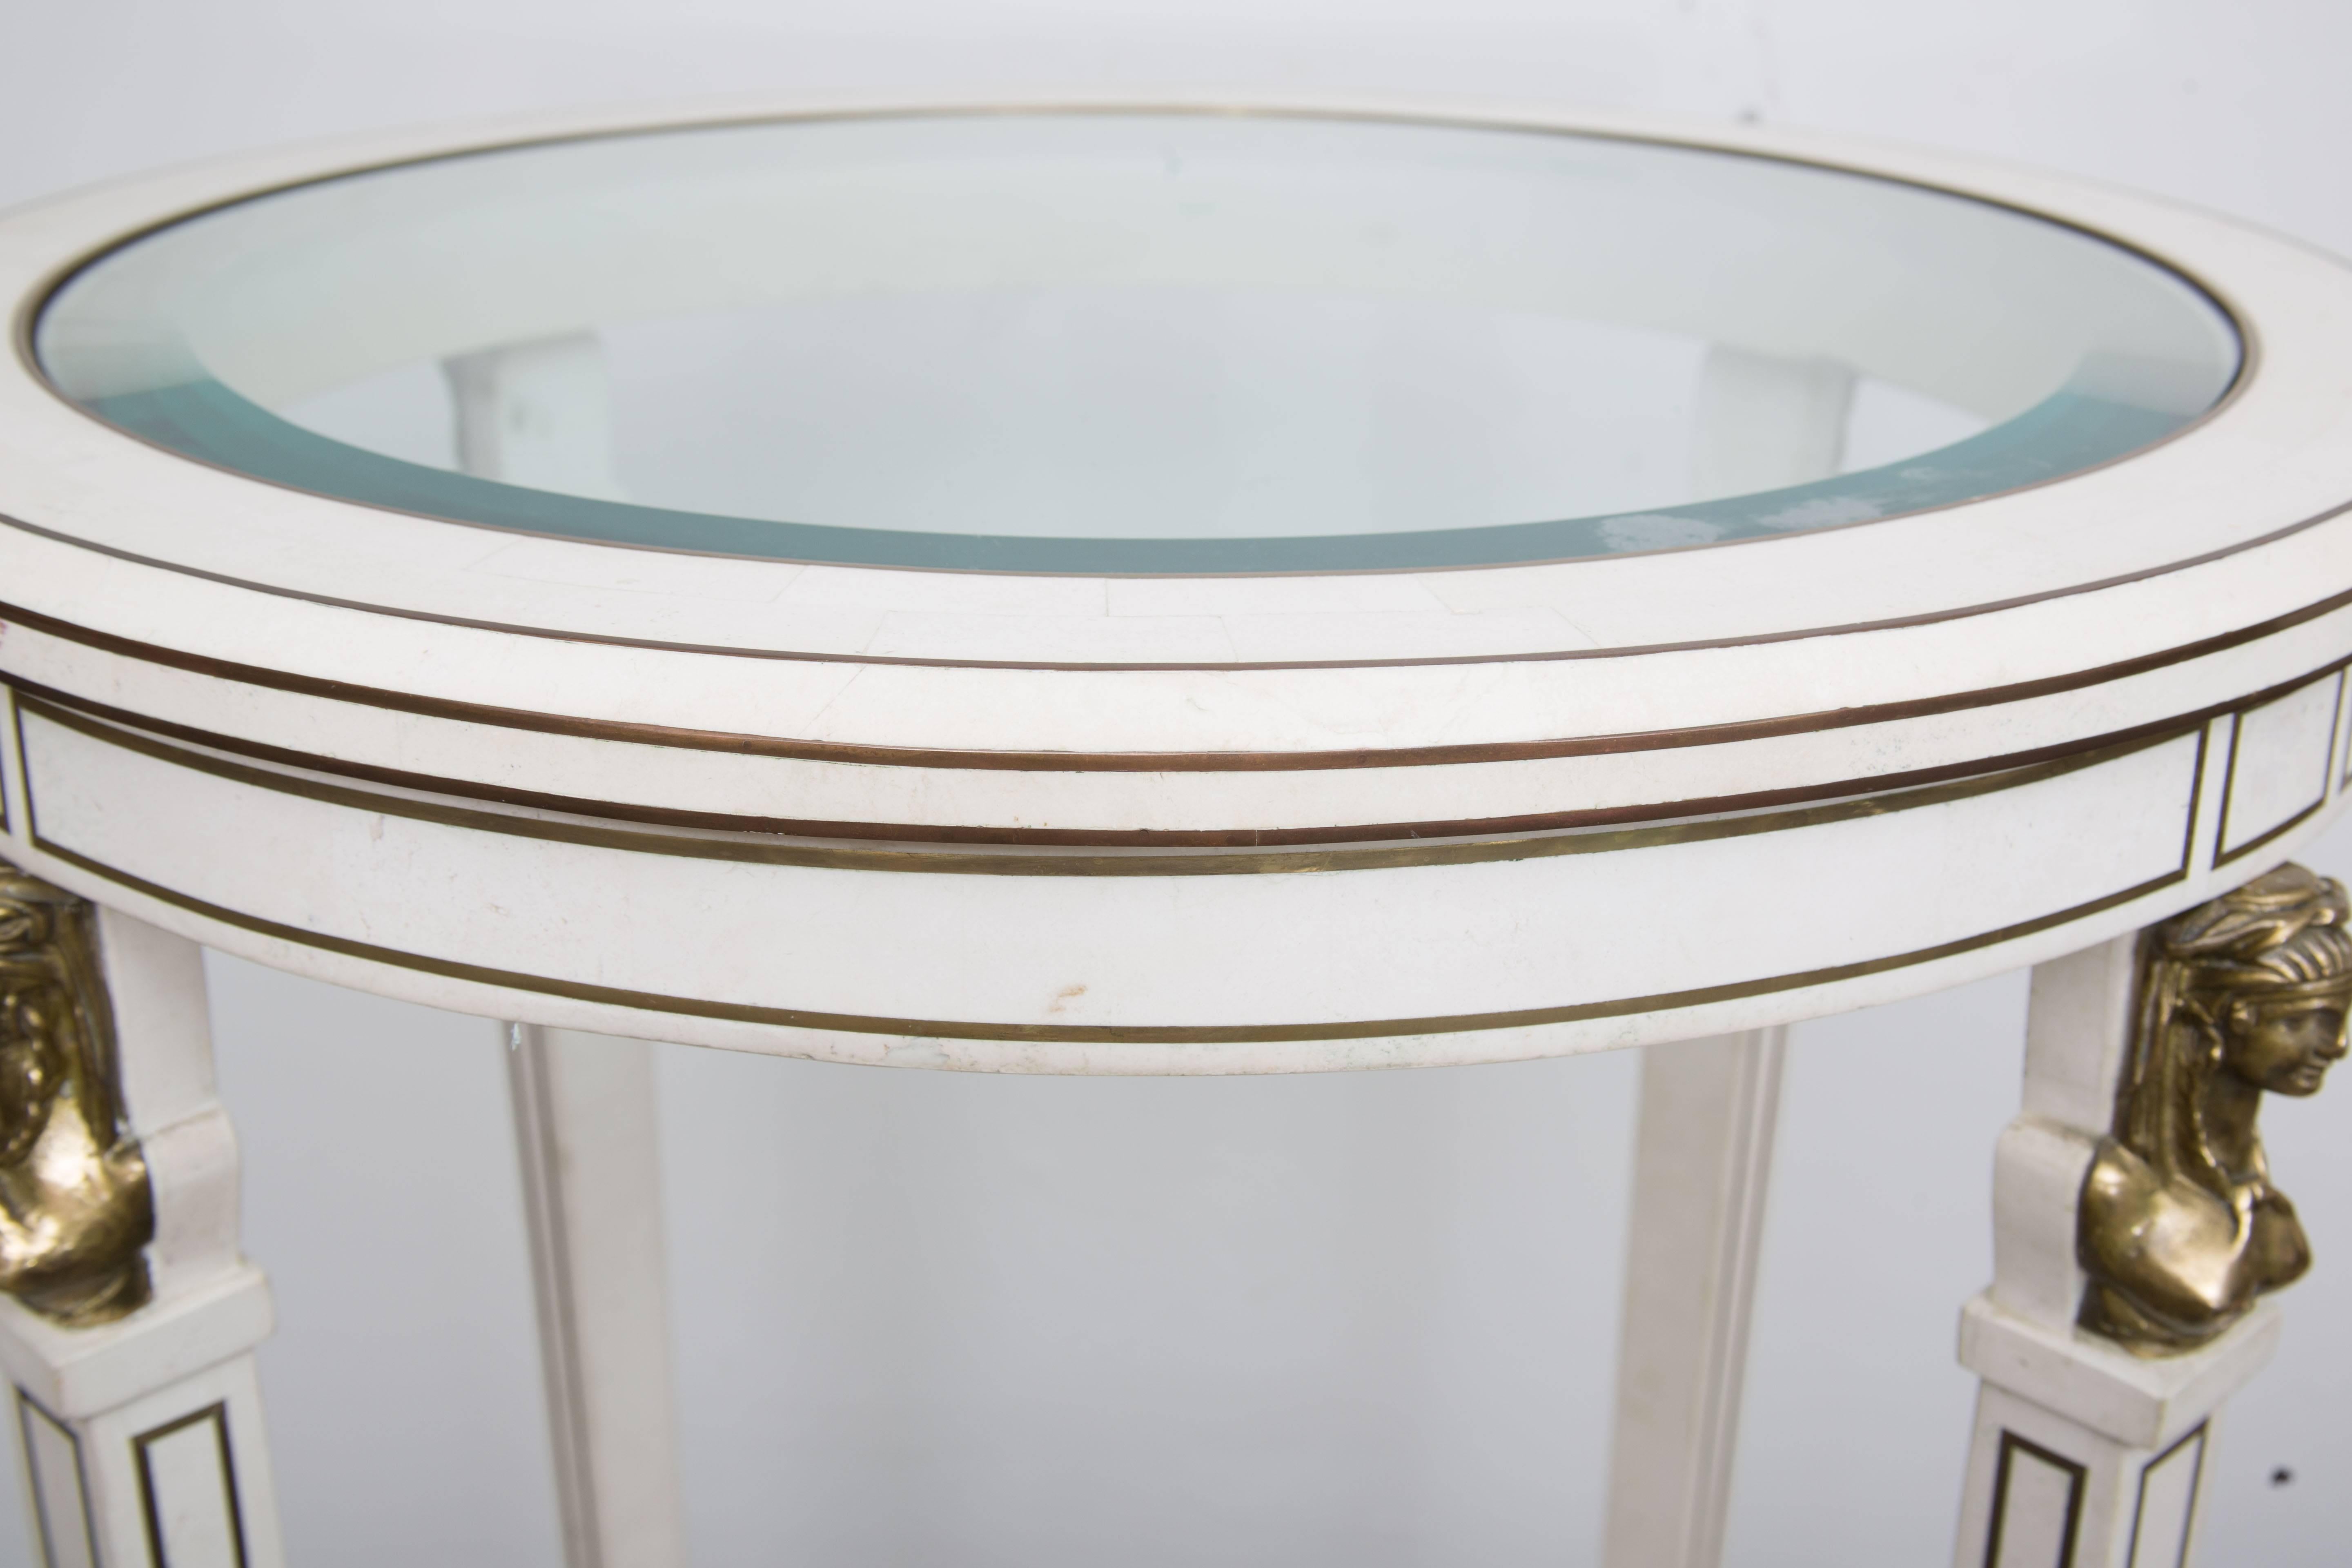 American Empire Style Circular Side Table with Glass Inset Top